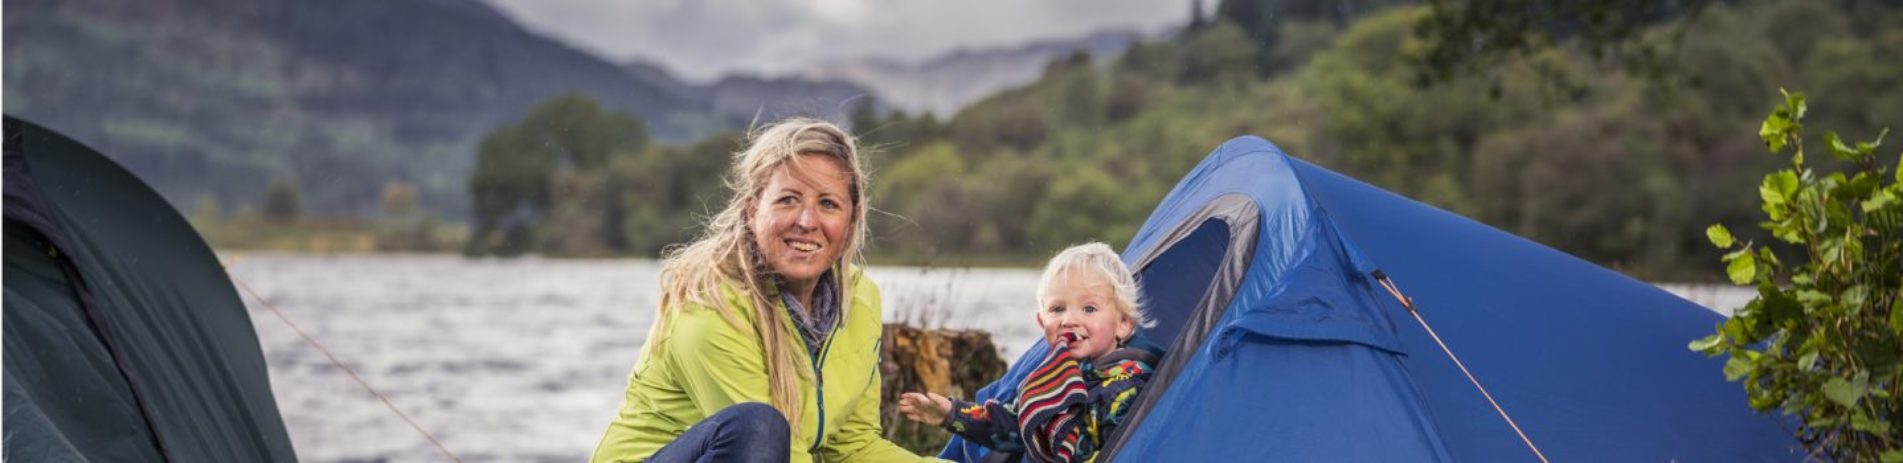 blonde-woman-holding-baby-at-blue-tent-entrance-at-edge-of-loch-chon